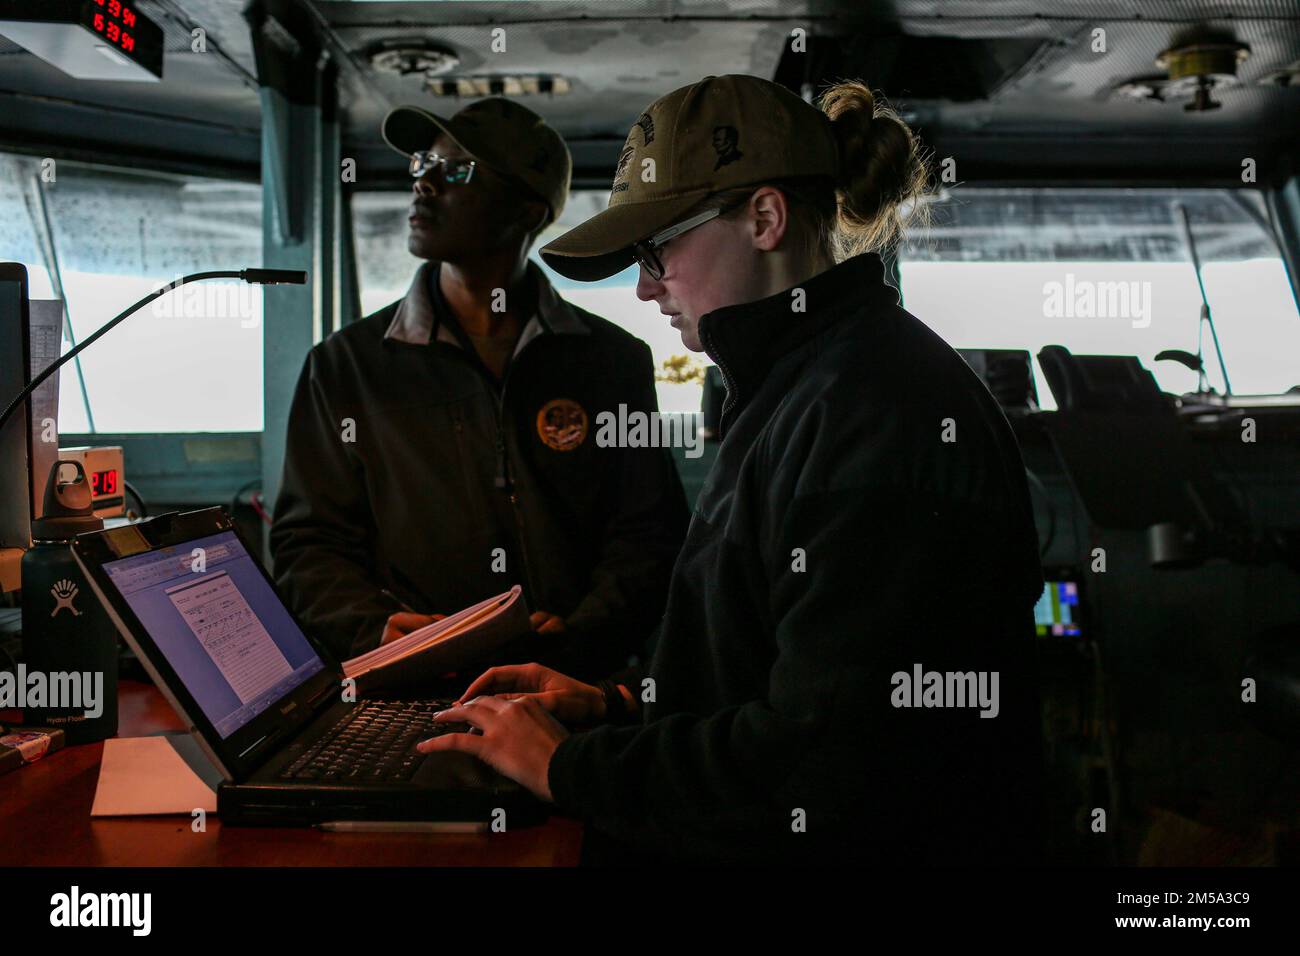 PHILIPPINE SEA (Feb. 14, 2022) Quartermaster Seaman Dakota Barnett, from Yuma, Ariz., makes a deck log entry on the bridge aboard the Nimitz-class aircraft carrier USS Abraham Lincoln (CVN 72). Abraham Lincoln Strike Group is on a scheduled deployment in the U.S. 7th Fleet area of operations to enhance interoperability through alliances and partnerships while serving as a ready-response force in support of a free and open Indo-Pacific region. Stock Photo